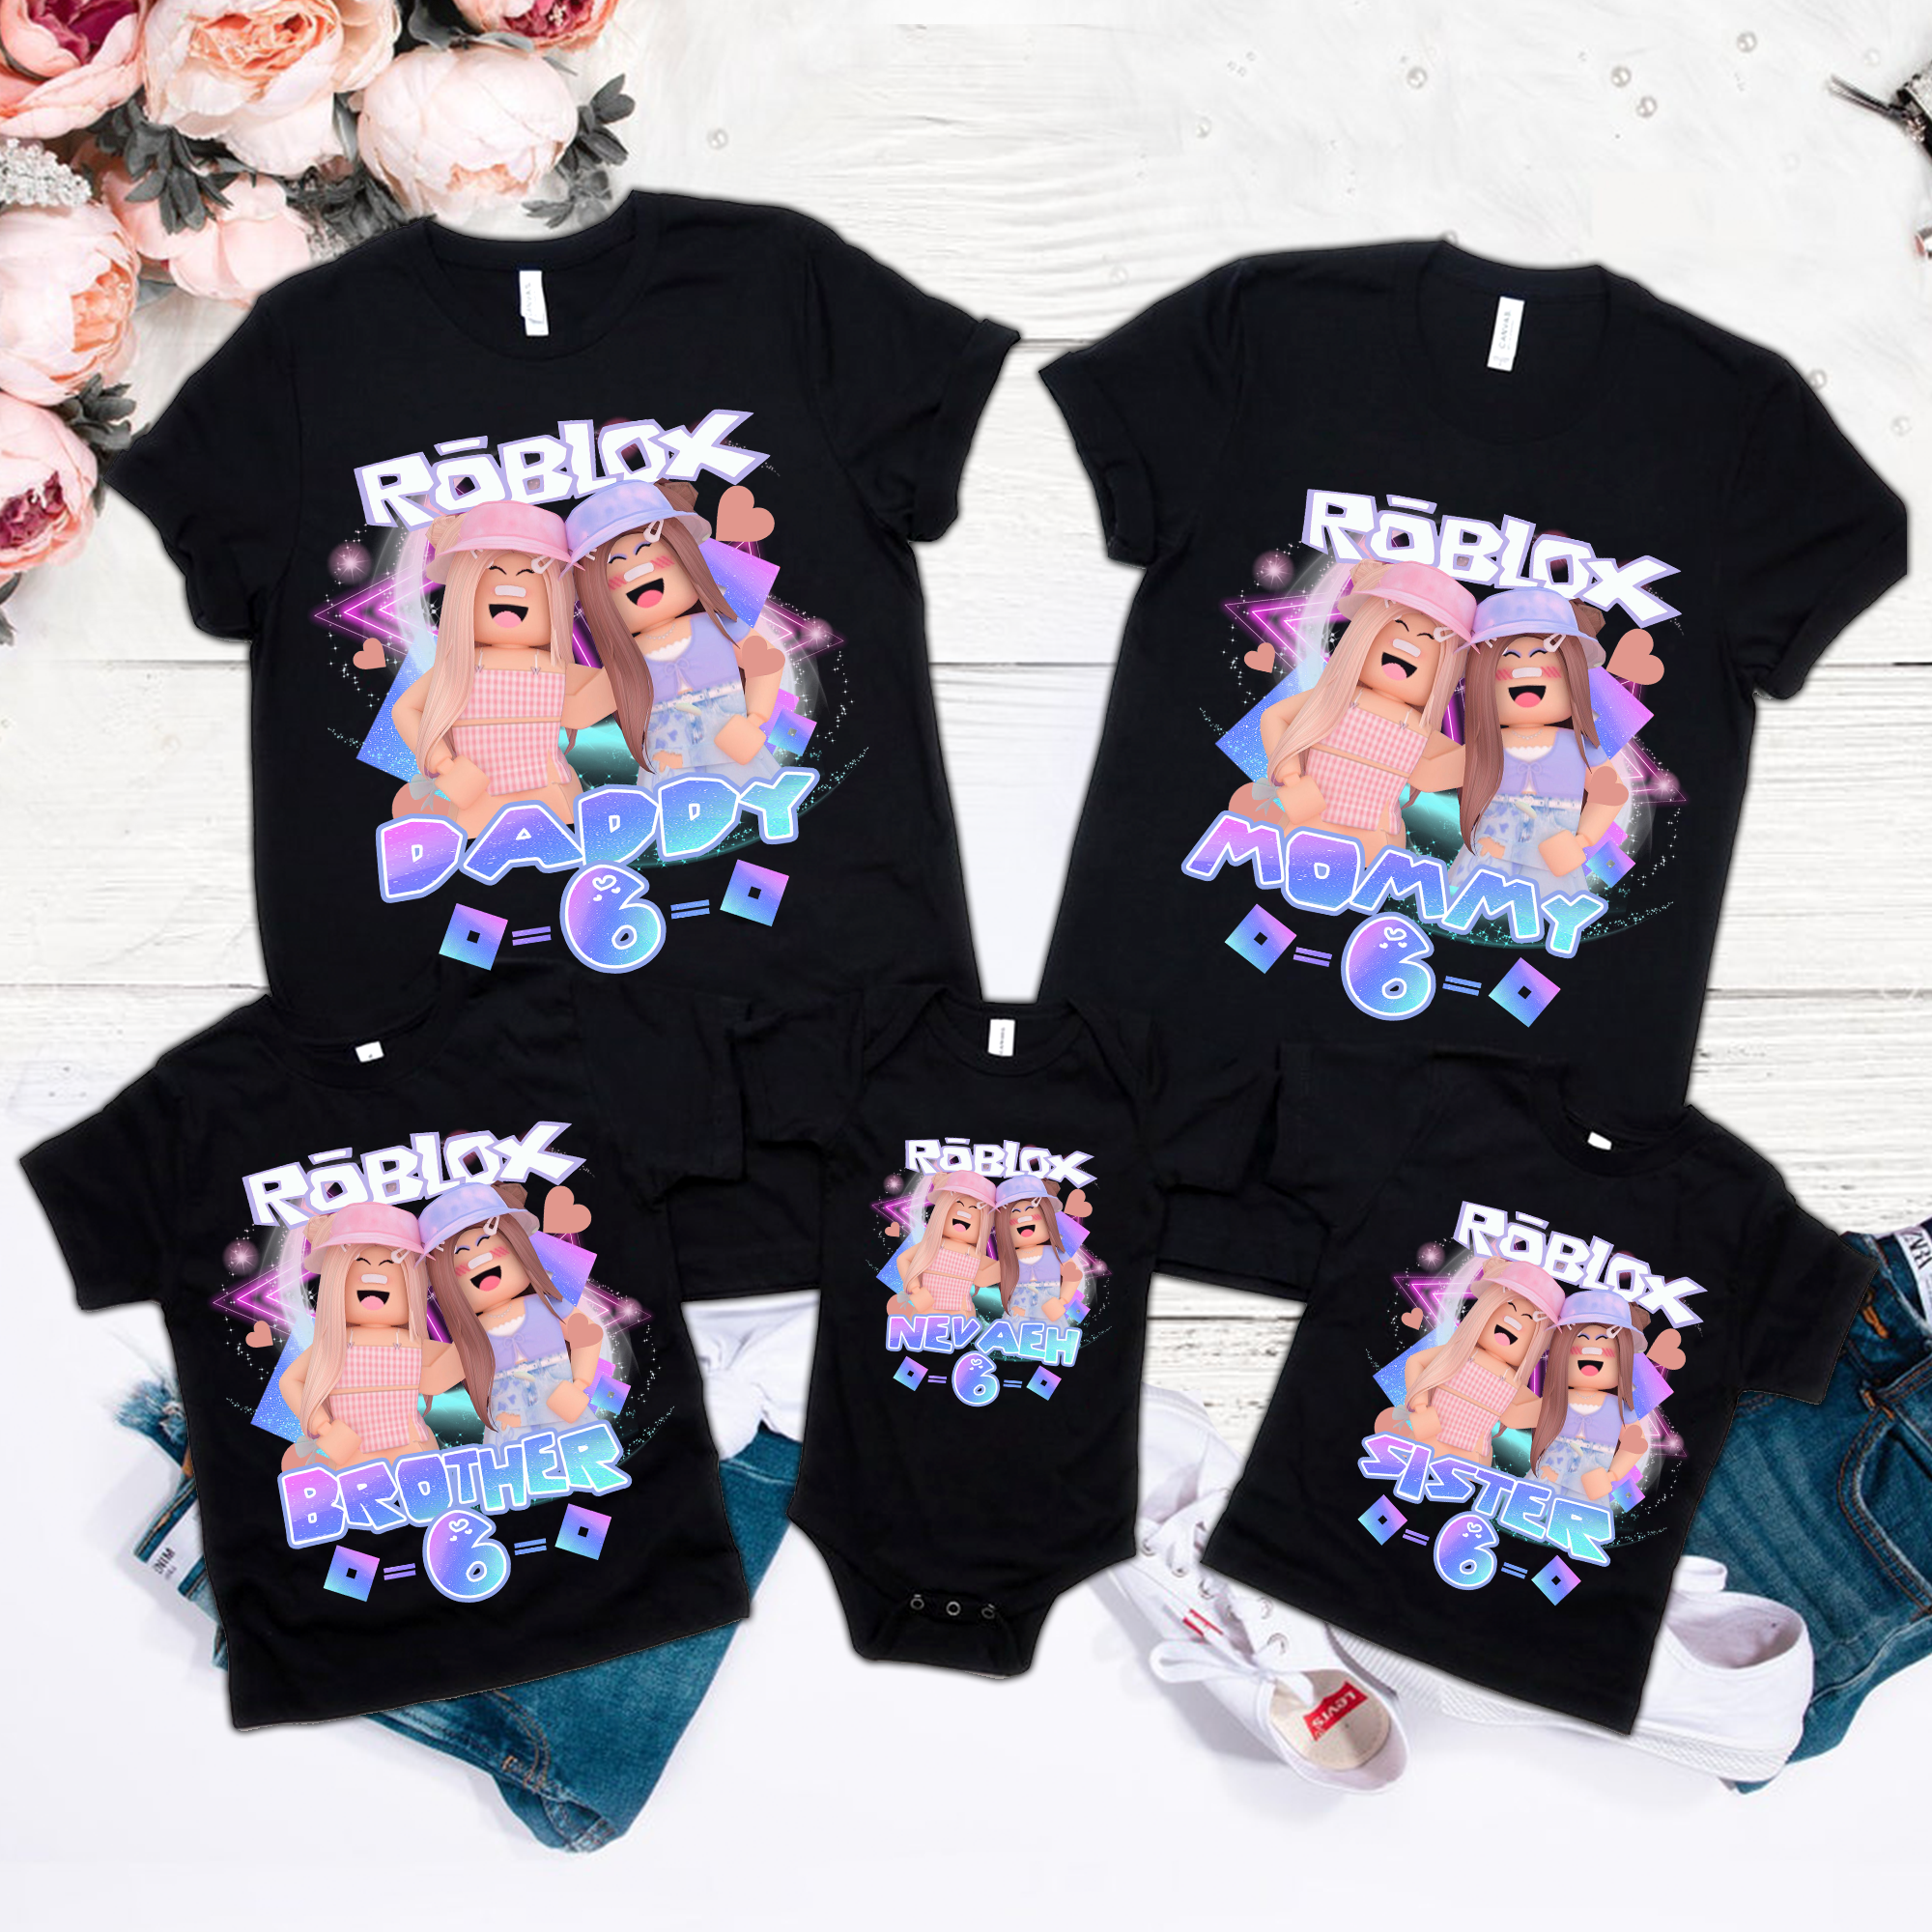 Girl Roblox Birthday Party Shirt, Roblox Girls Shirt, Roblox Girl Family Shirt, Girl Roblox Party, Custom Name And Age